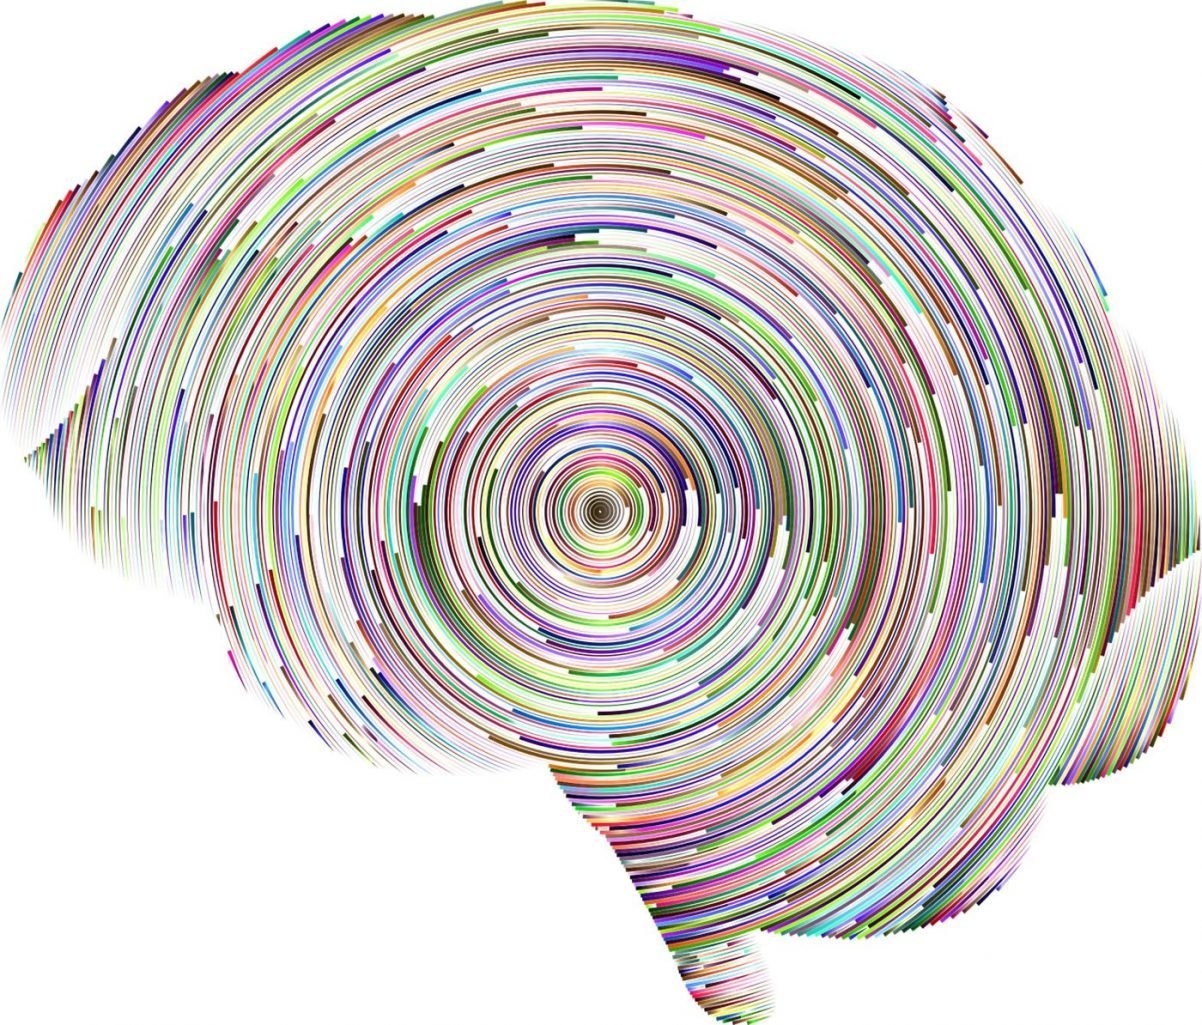 This shows a swirly brain